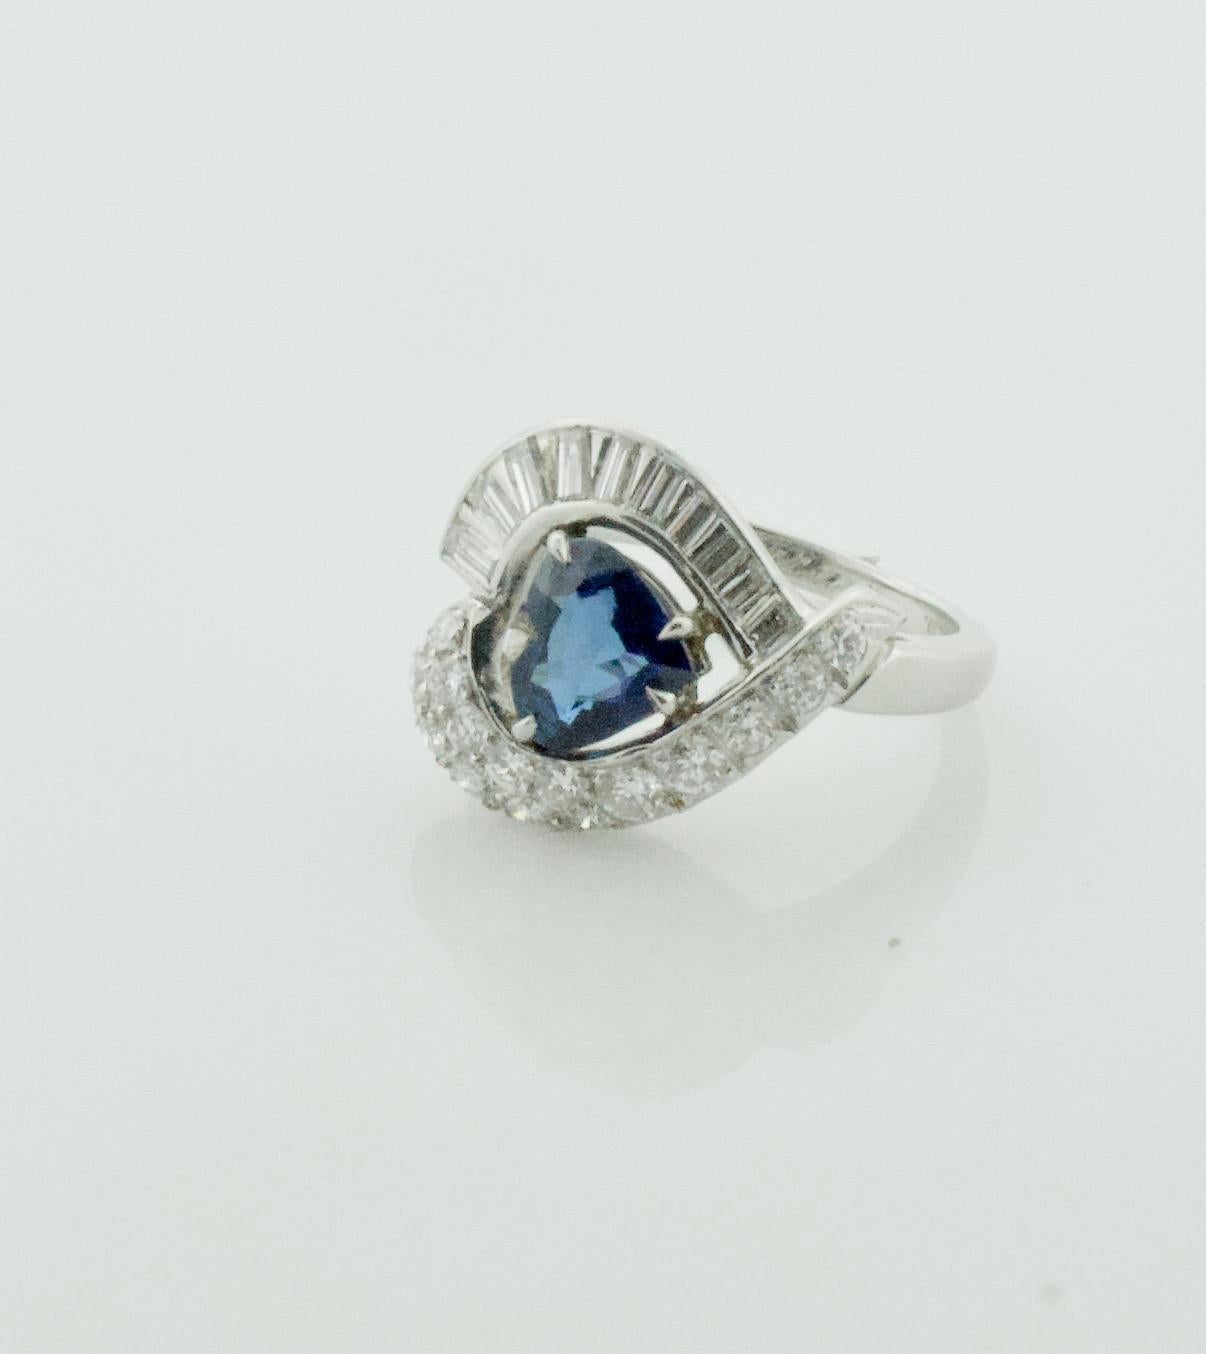 1950's Platinum Heart Shaped Sapphire and Diamond Ring
The Heart Wants What The Heart Wants. And This Heart Wants To Face East-West
One Heart Shaped Sapphire Weighing 1.65 Carats Approximately [bright with no imperfections visible to the naked